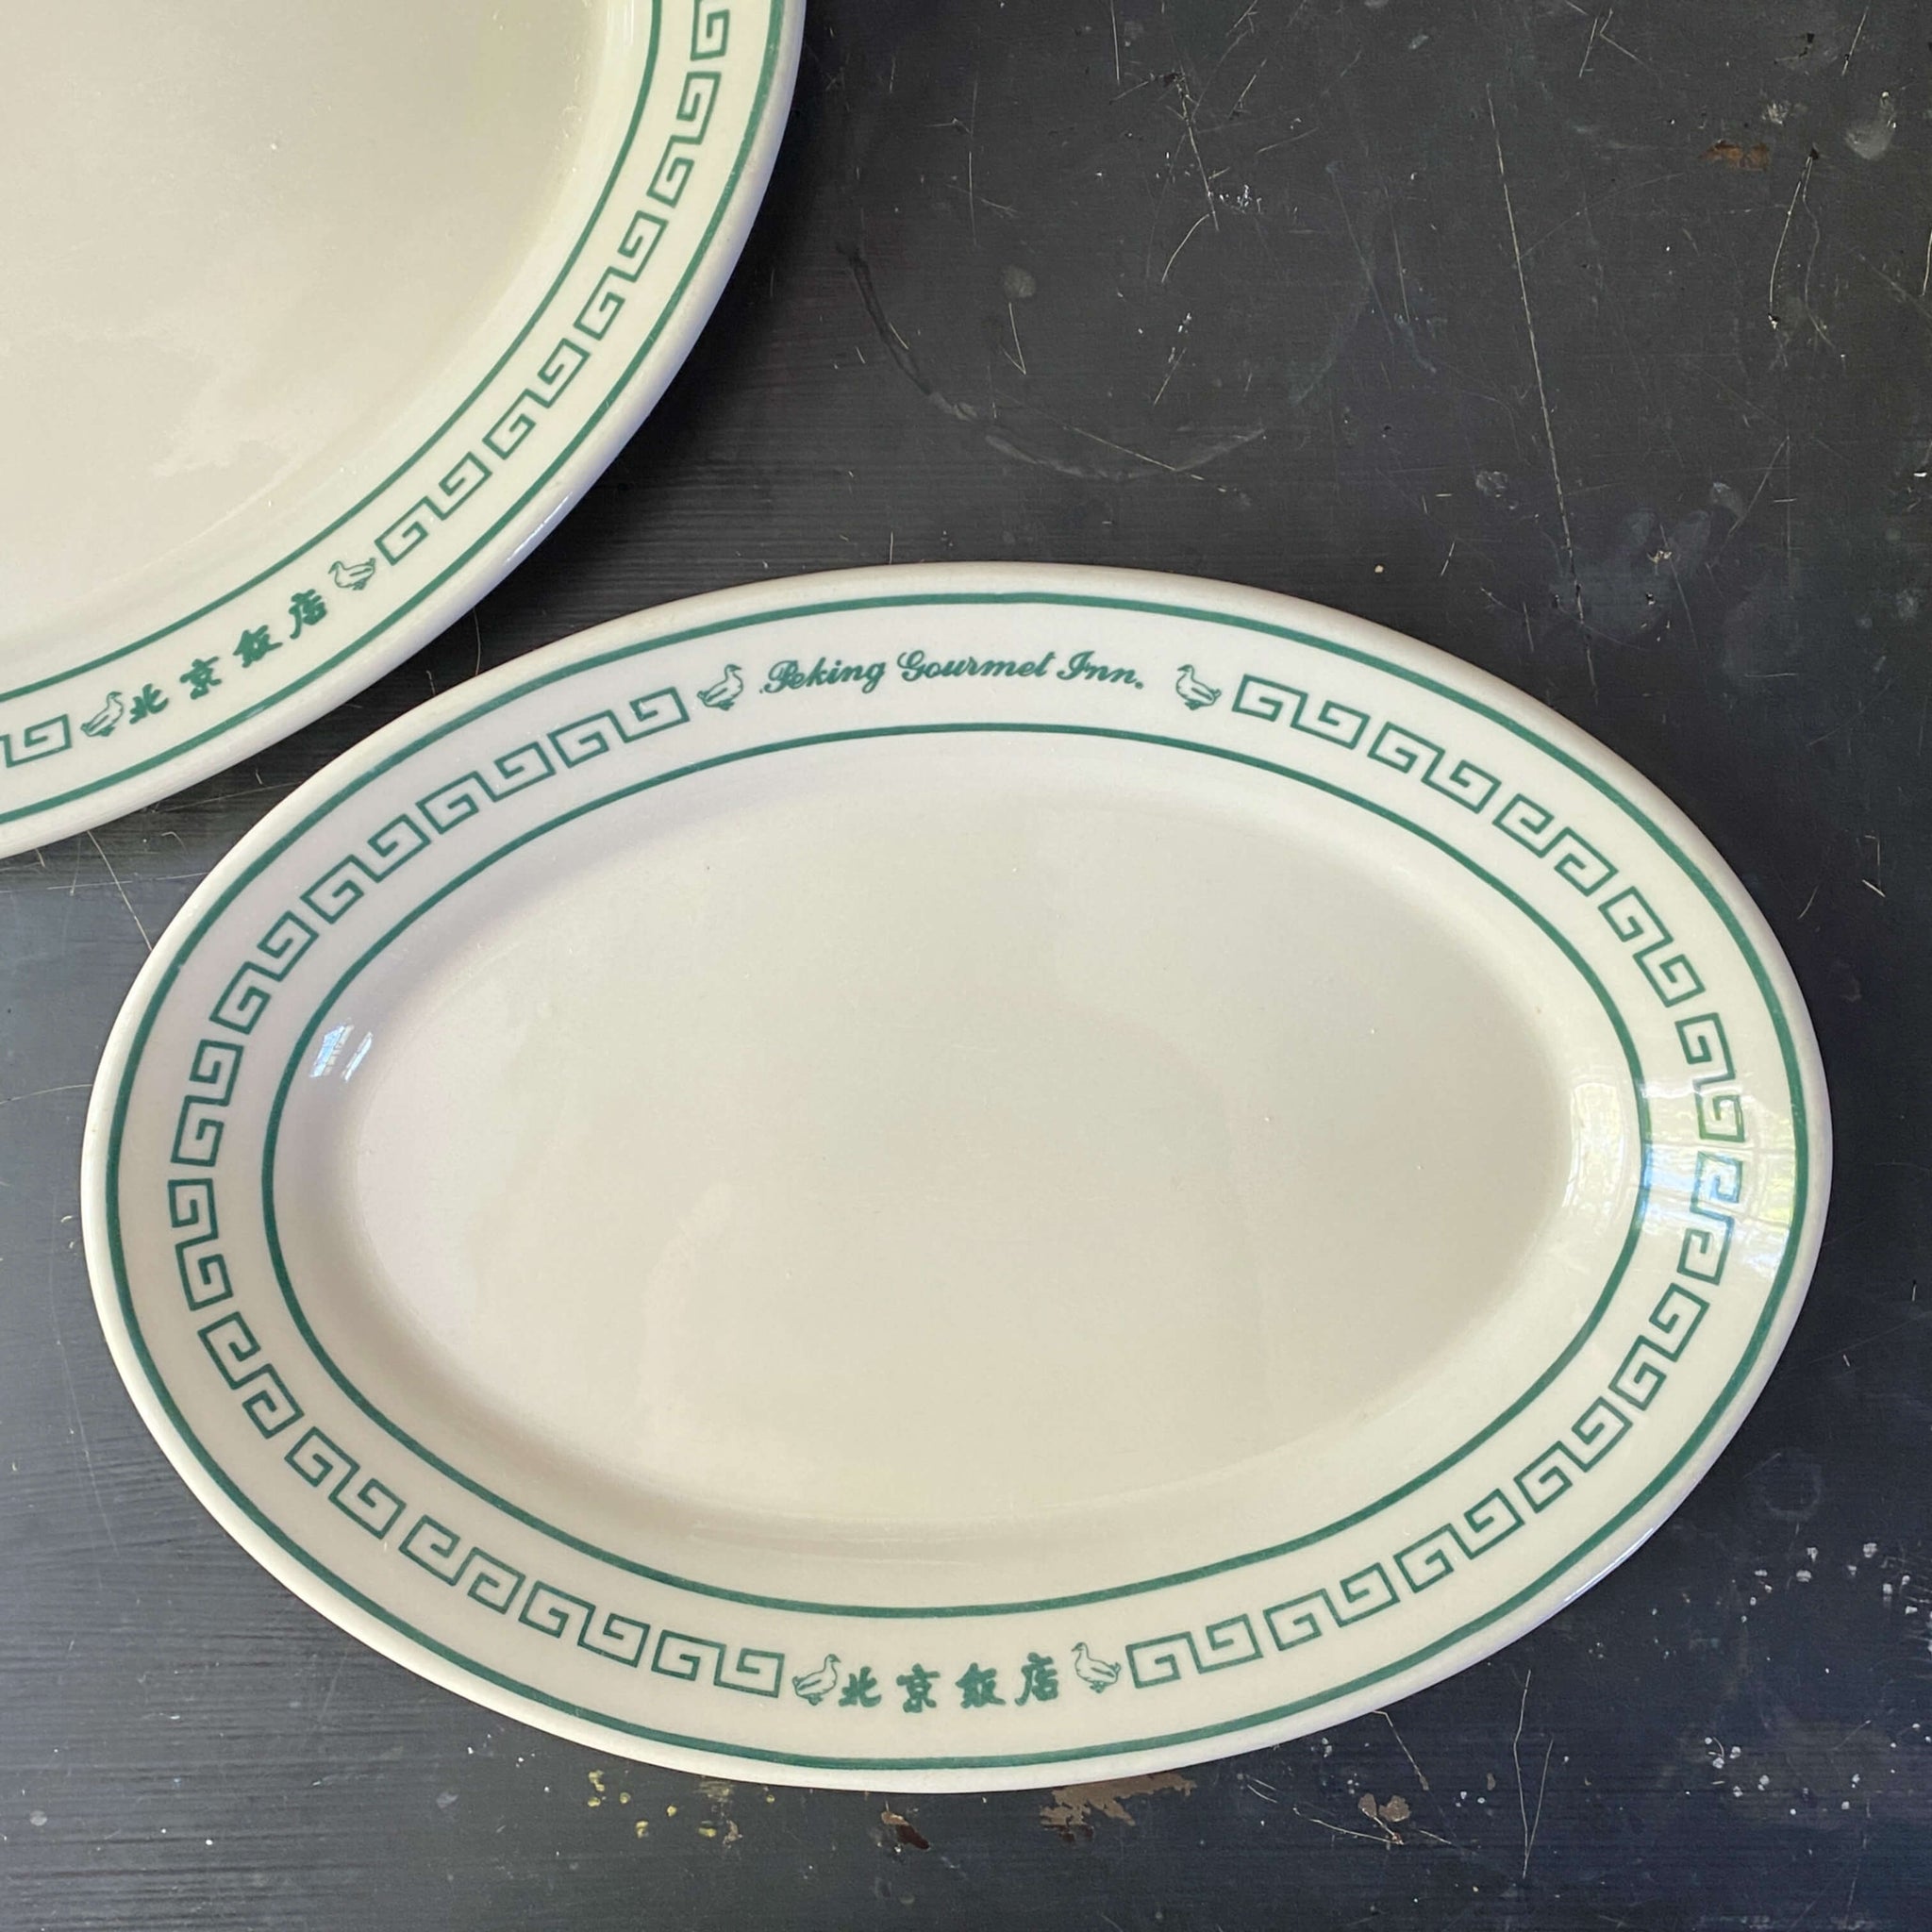 Vintage Peking Gourmet Inn Oval Side Dish Plates by Homer Laughlin - Set of Two circa 2000